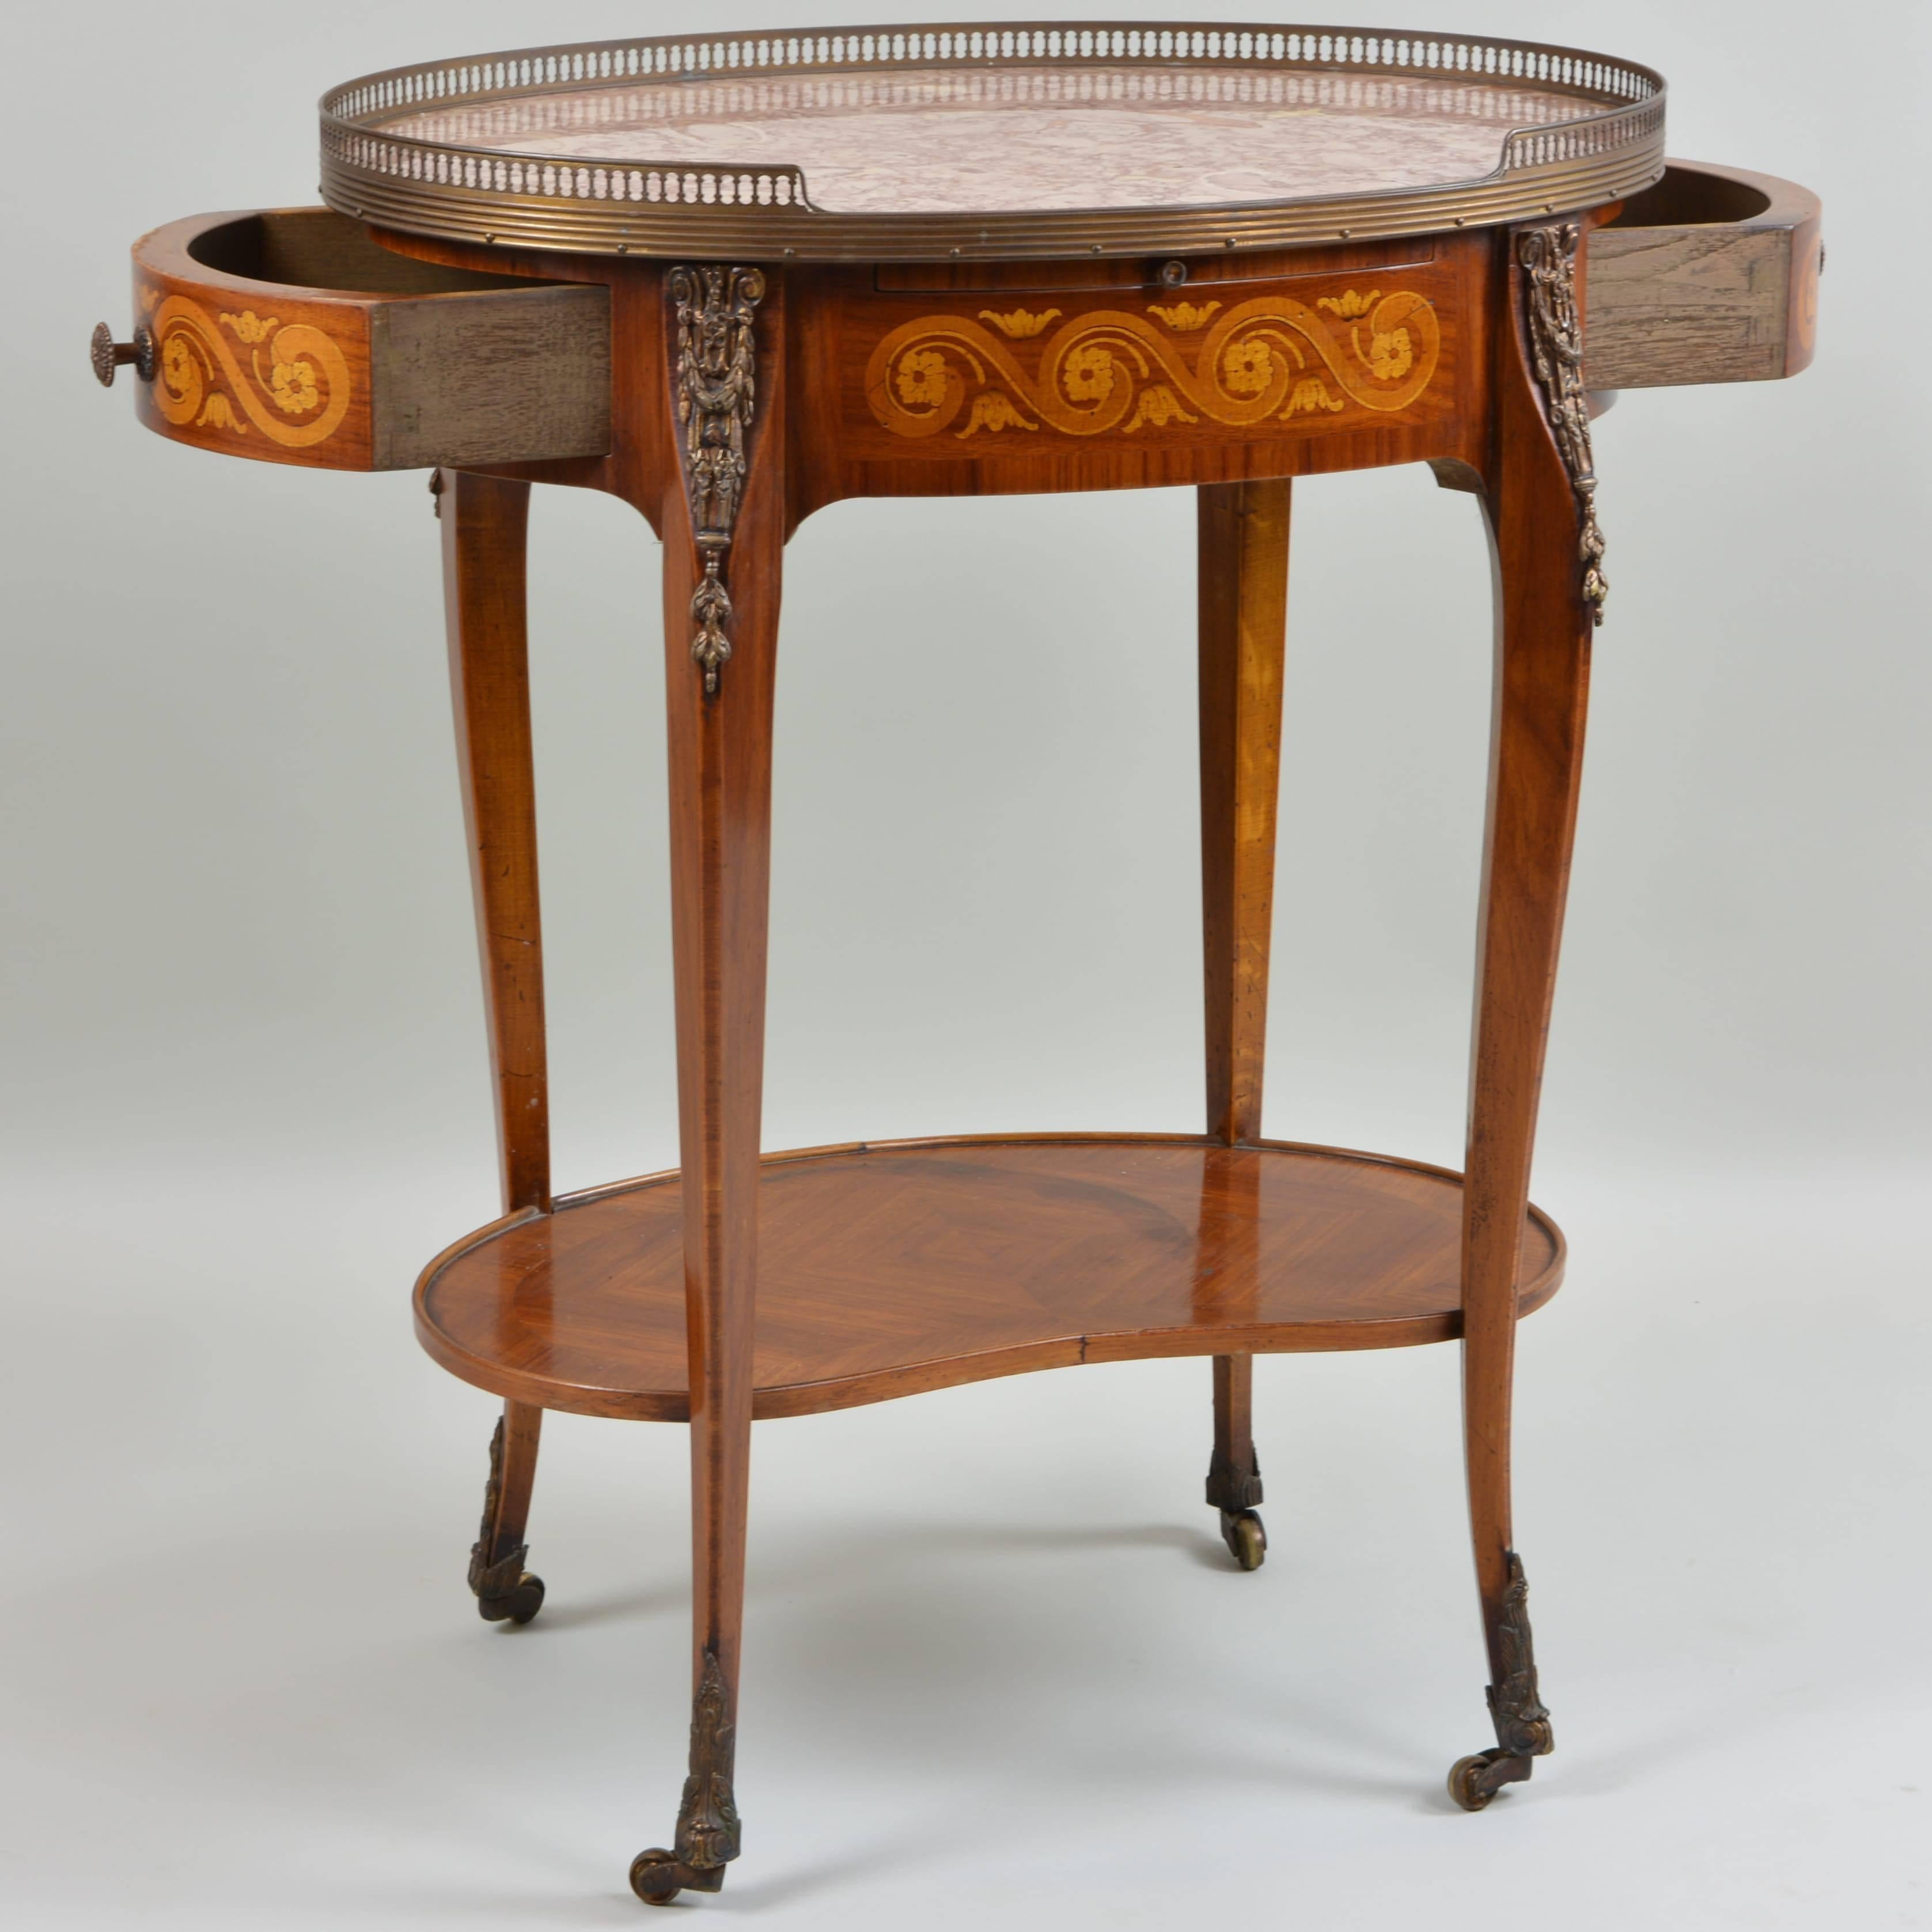 19th Century Marble-Top Oval Side Table